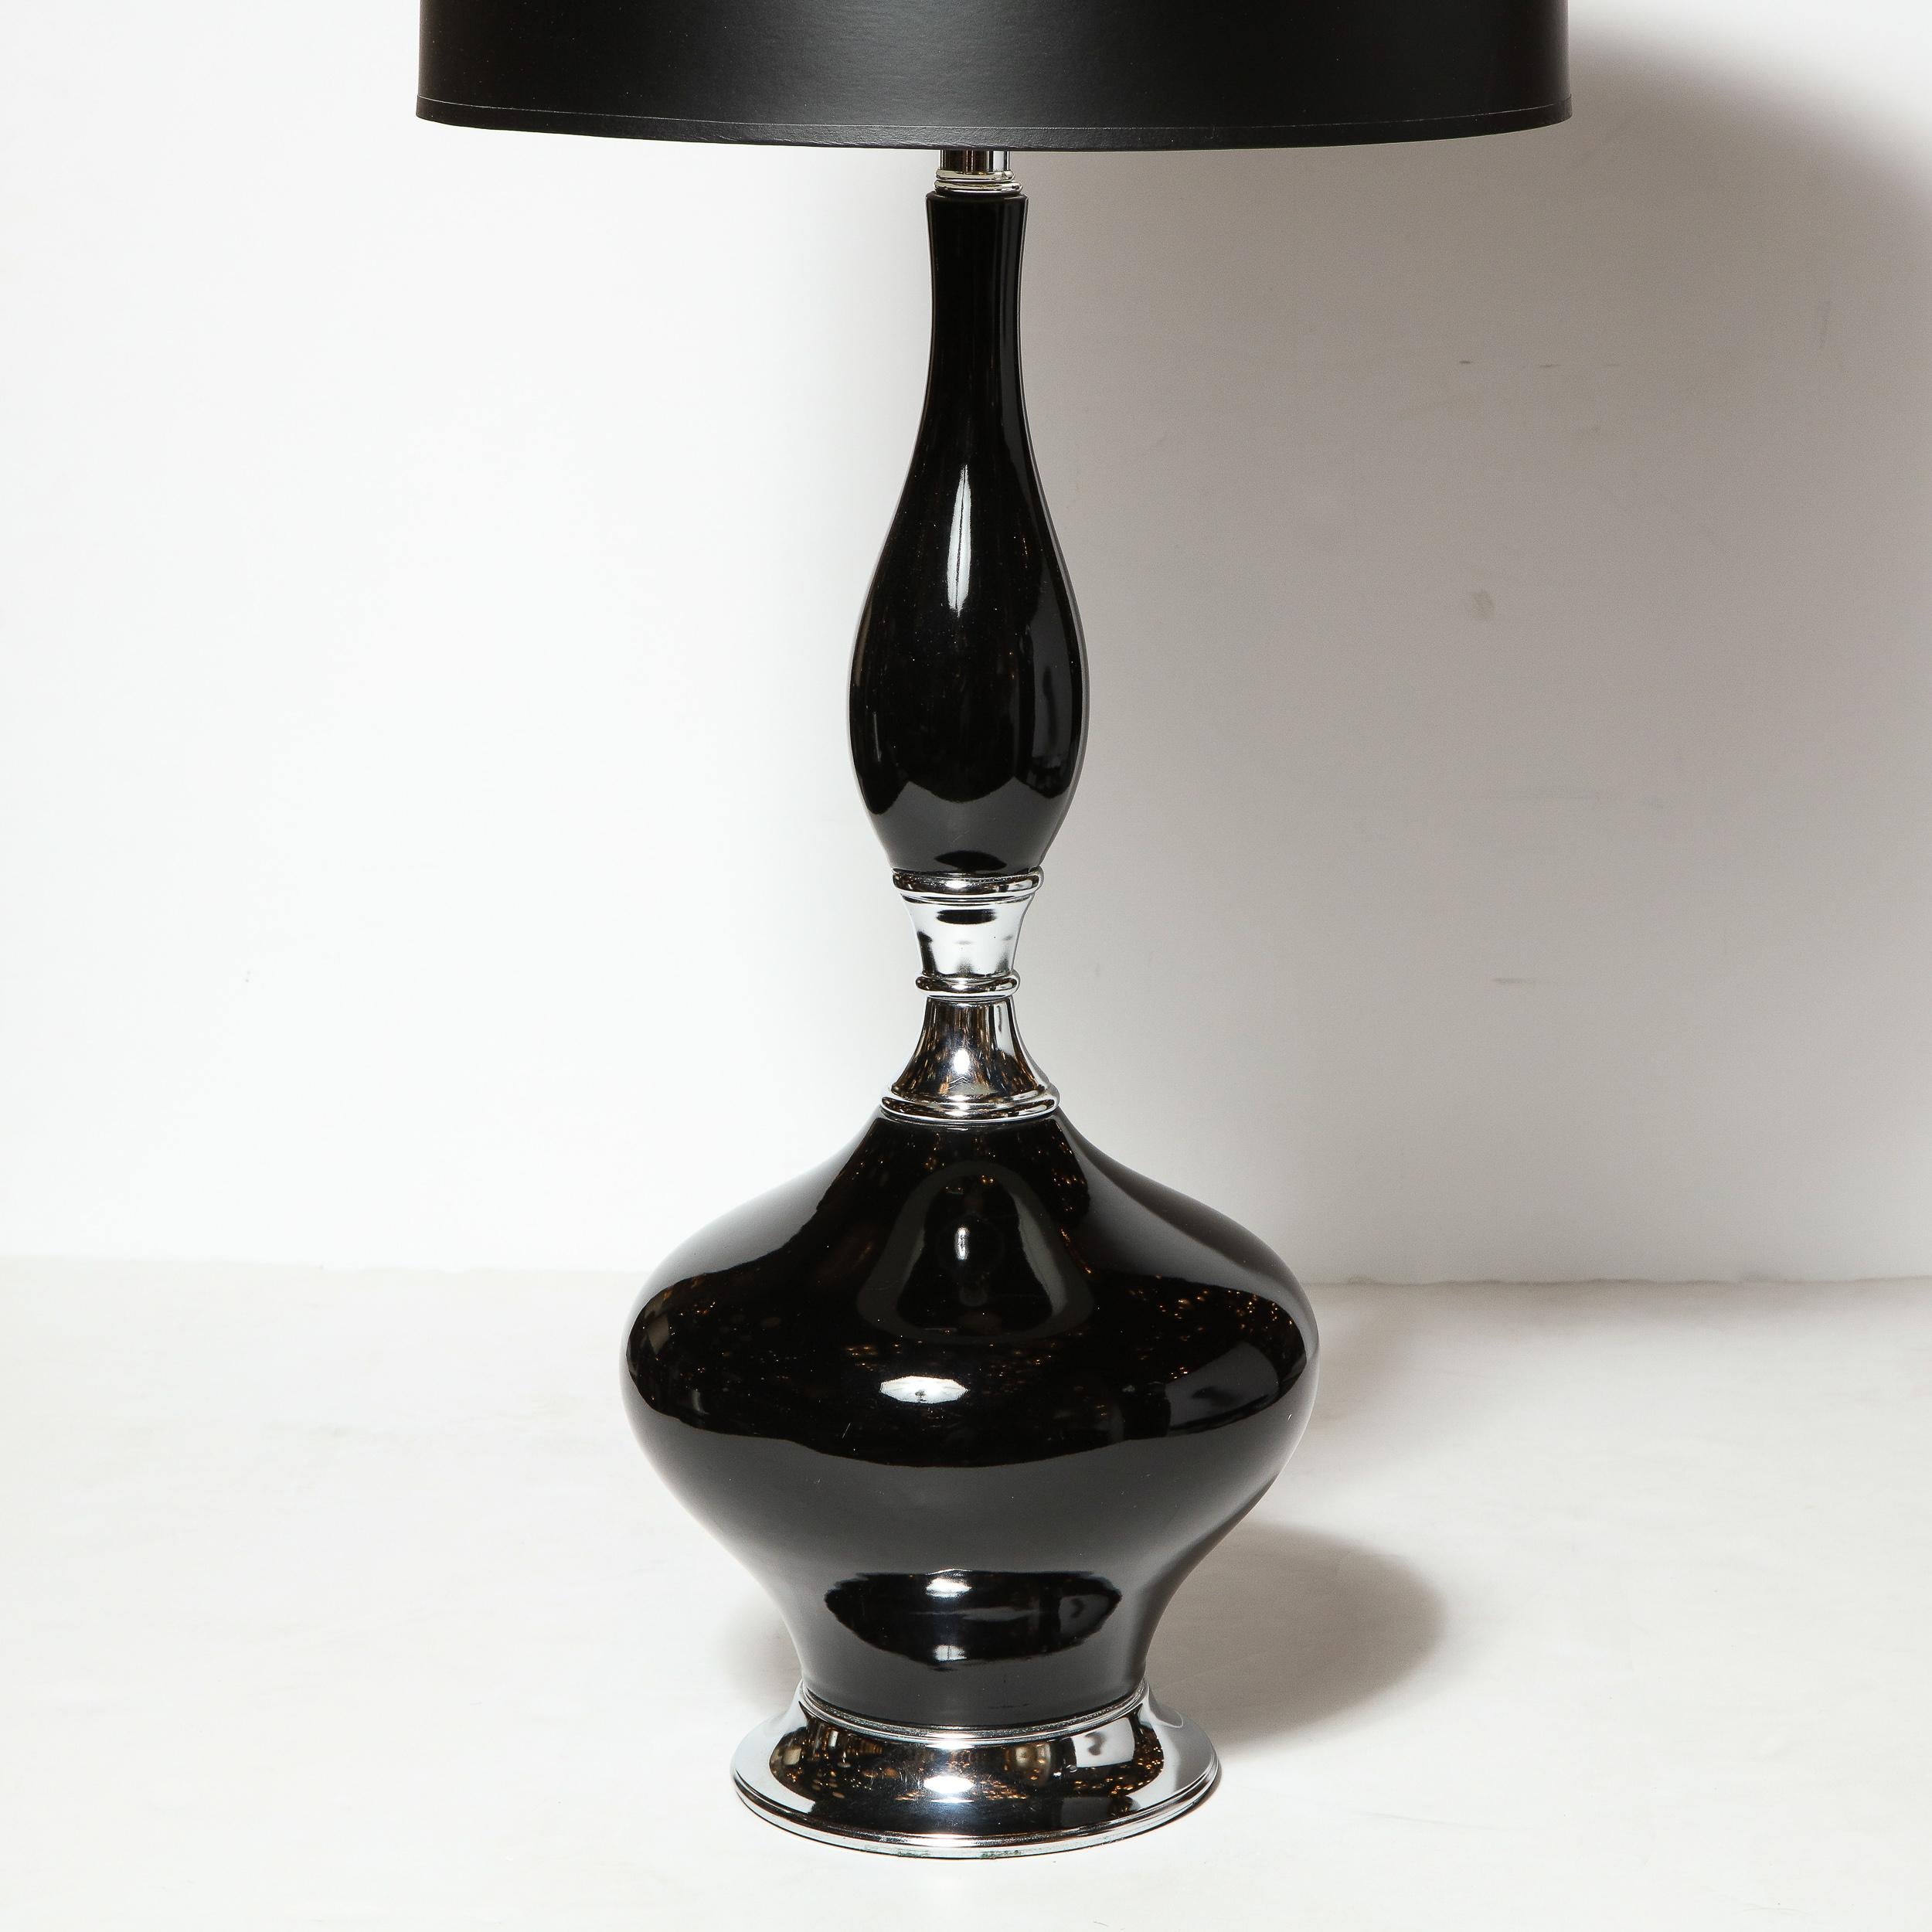 This beautiful pair of Mid-Century Modern ceramic lamps were realized in the United States, circa 1960. They feature an organic protuberant form- full of sinuous curves- finished in a lustrous black glaze that extends upwards from a lustrous chrome